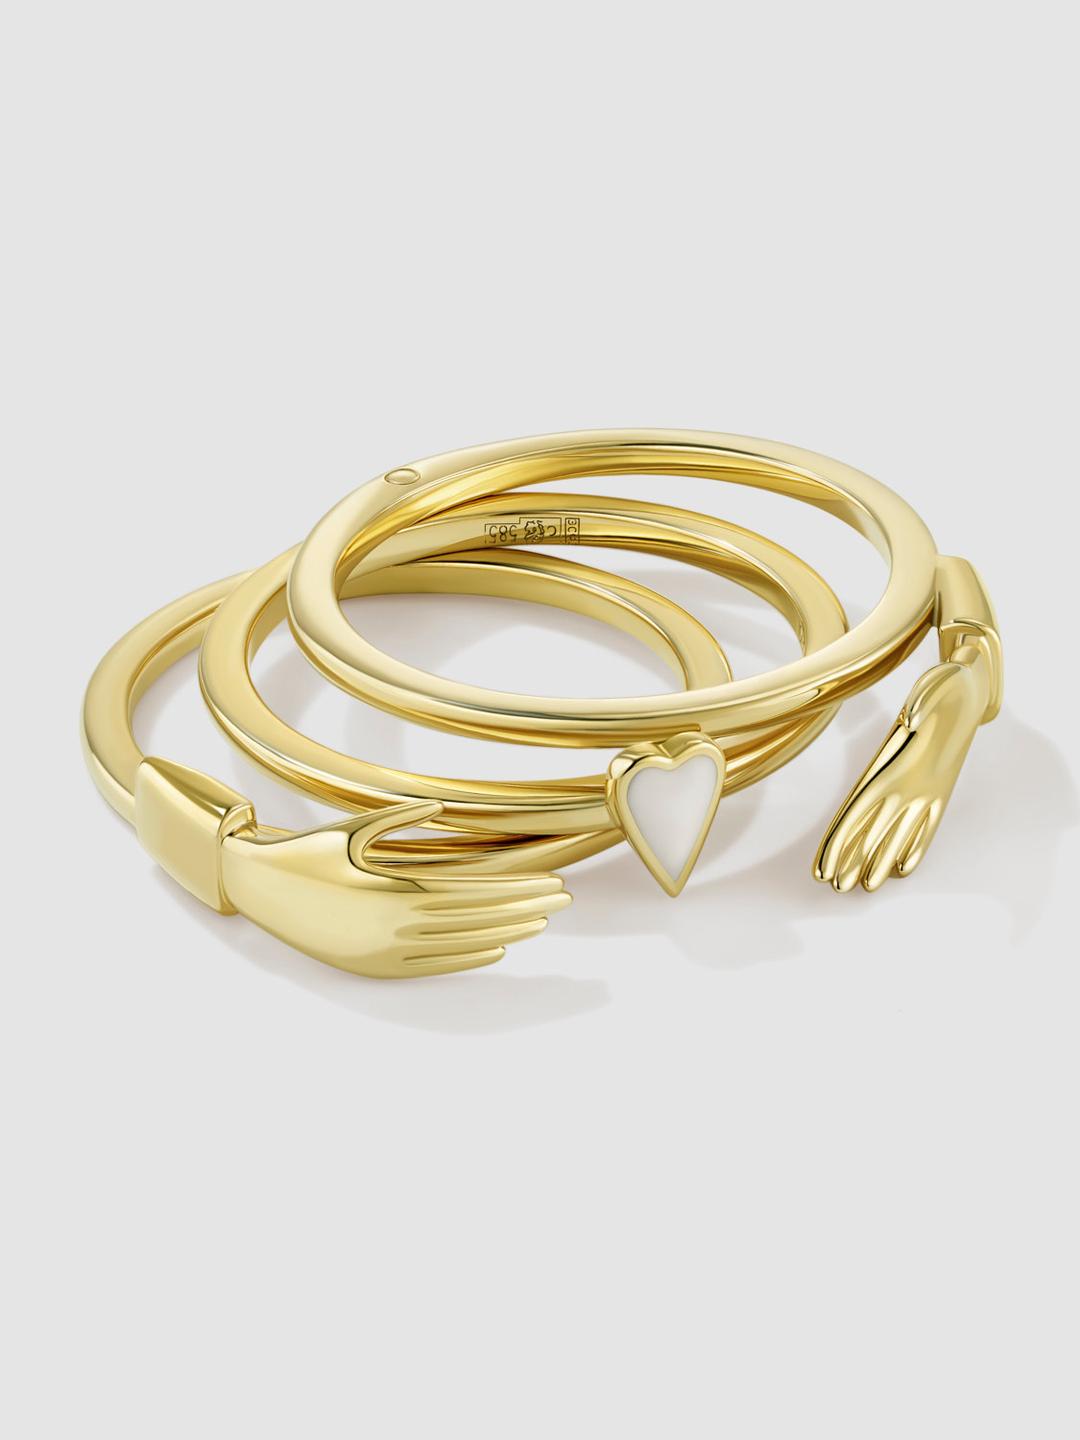 Hand In Hand Ring In Yellow Gold